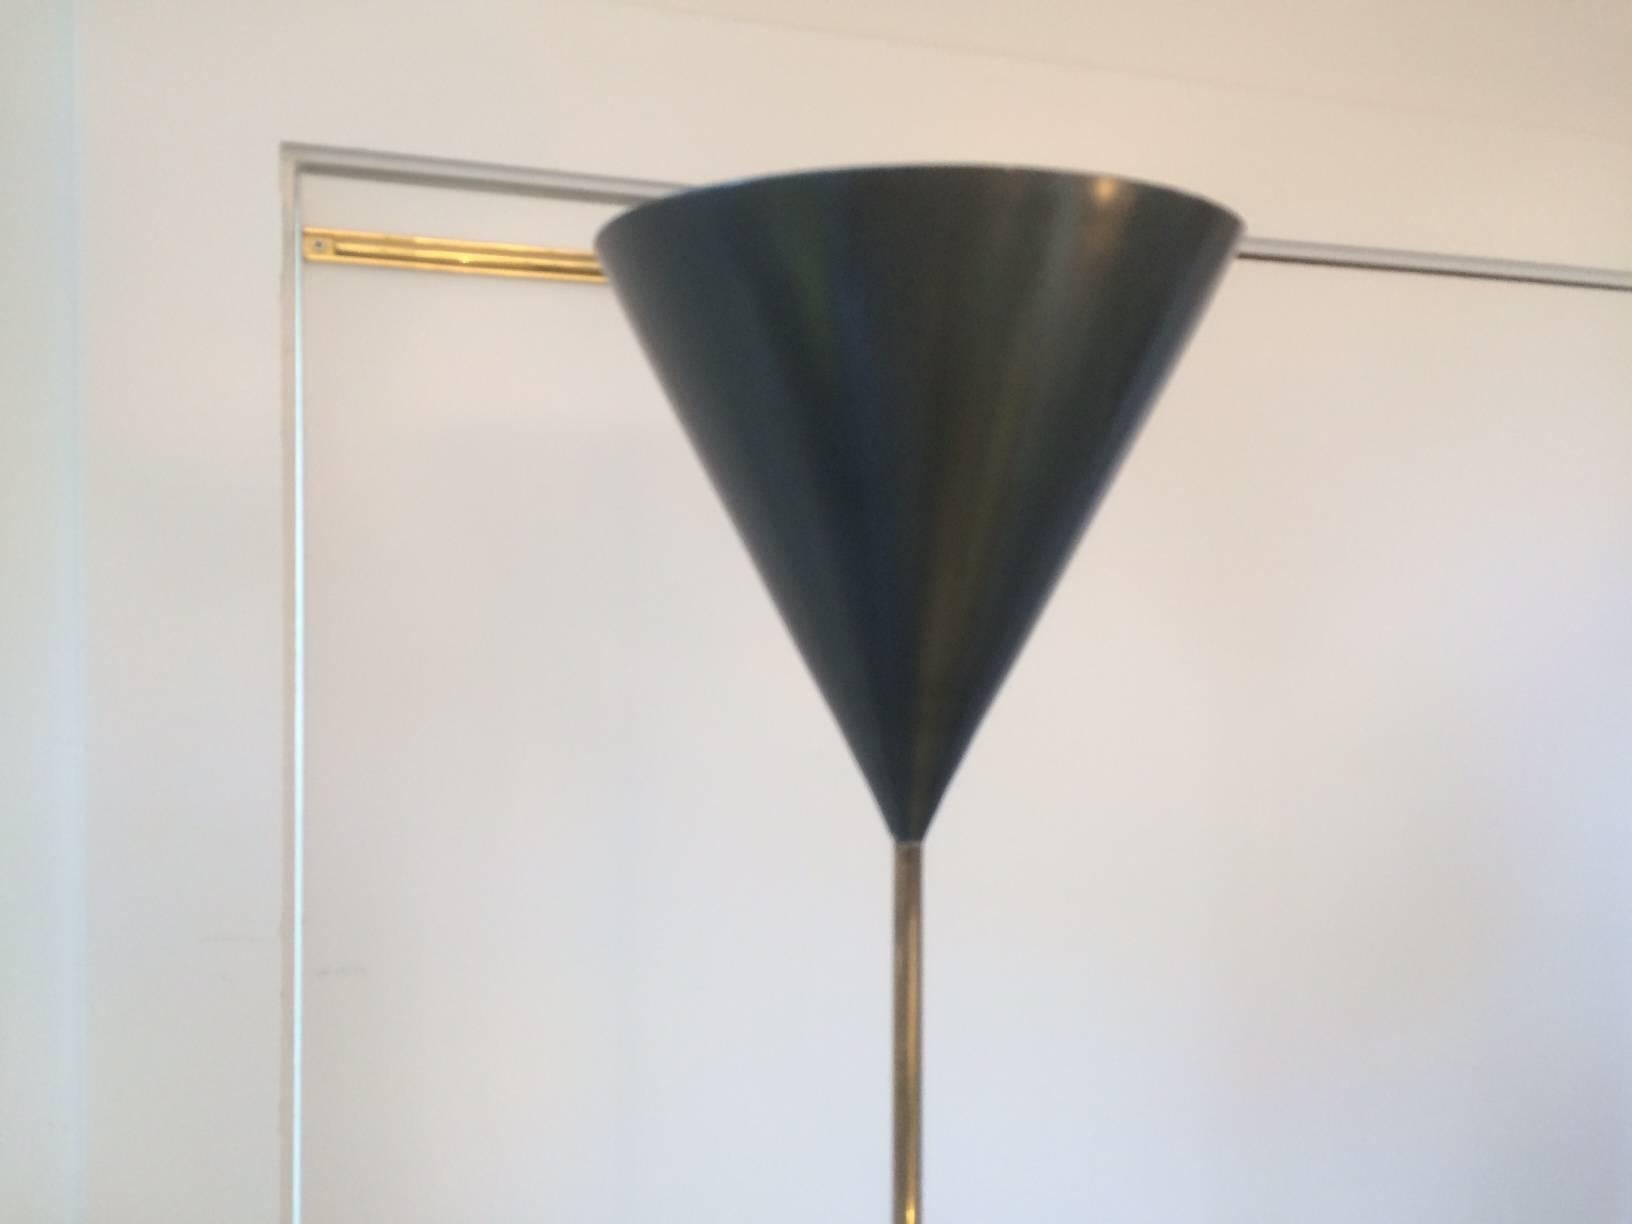 Italian brass floor lamp by Luigi Caccia Dominioni for Azucena
Chic and elegant brass with enameled black up-shade.
Early edition with original brass foot switch.